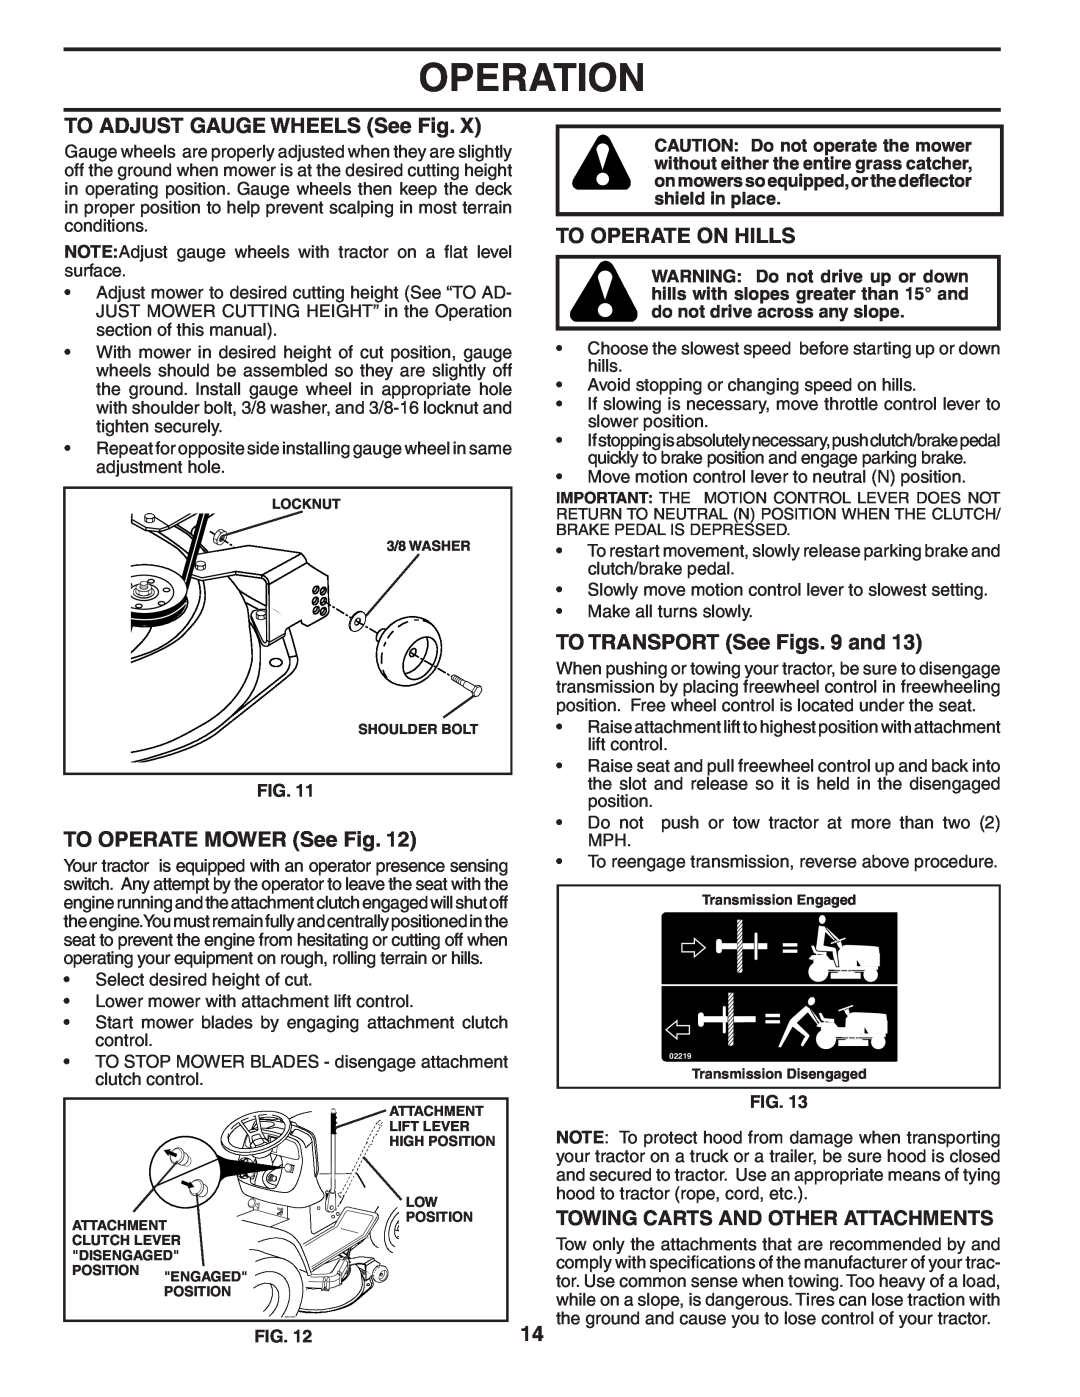 Husqvarna CTH180 XP owner manual TO ADJUST GAUGE WHEELS See Fig, TO OPERATE MOWER See Fig, To Operate On Hills, Operation 